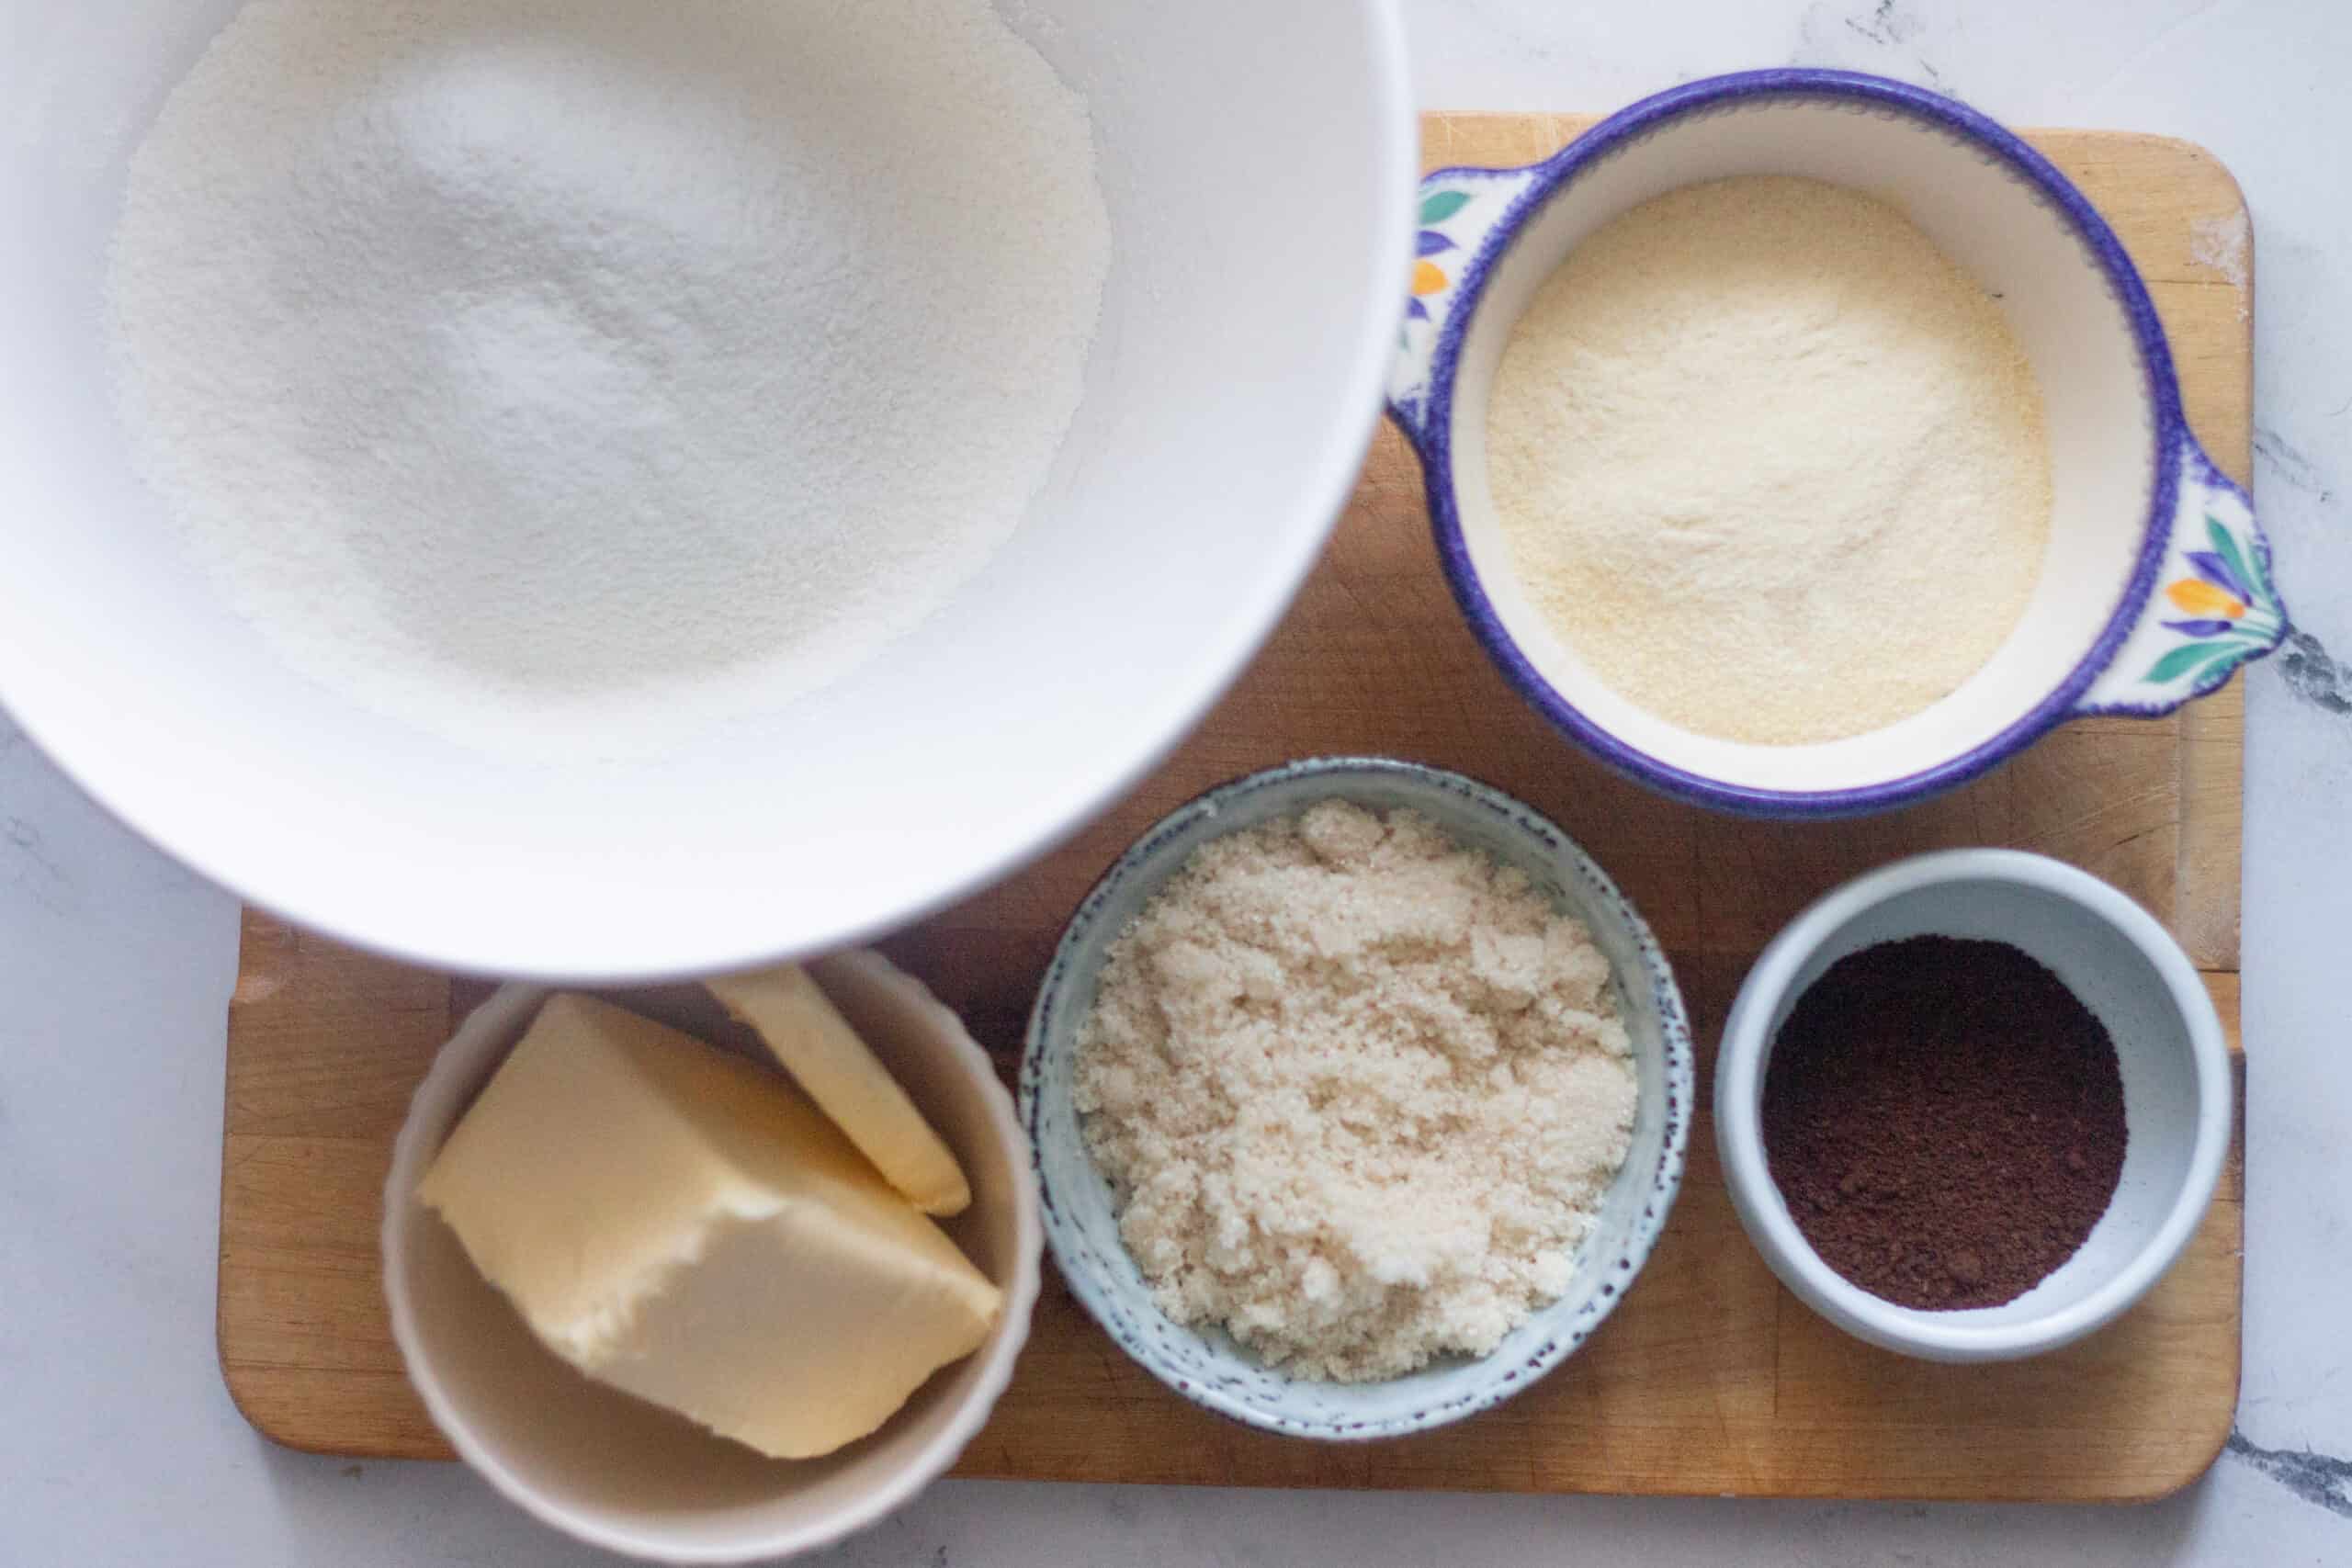 Ingredients for Coffee Shortbread